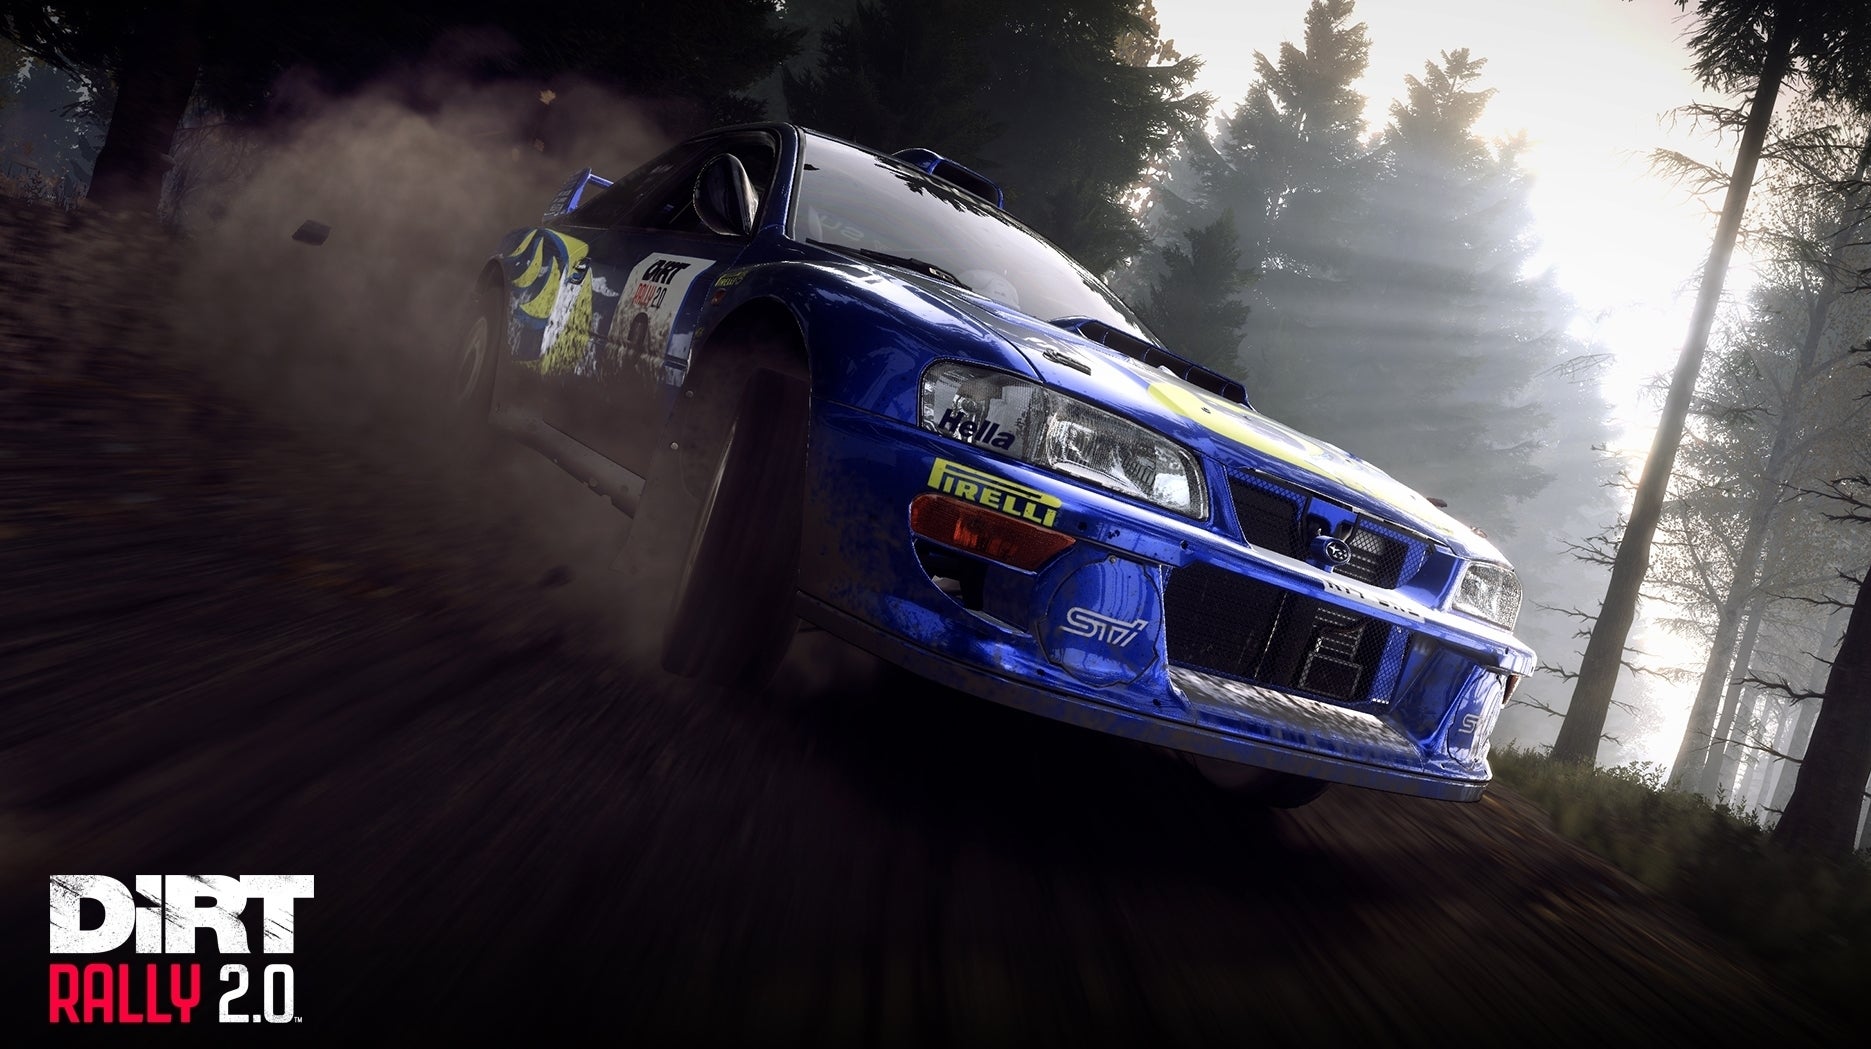 Dirt Rally Wallpapers  Top 24 Best Dirt Rally Wallpapers  HQ 